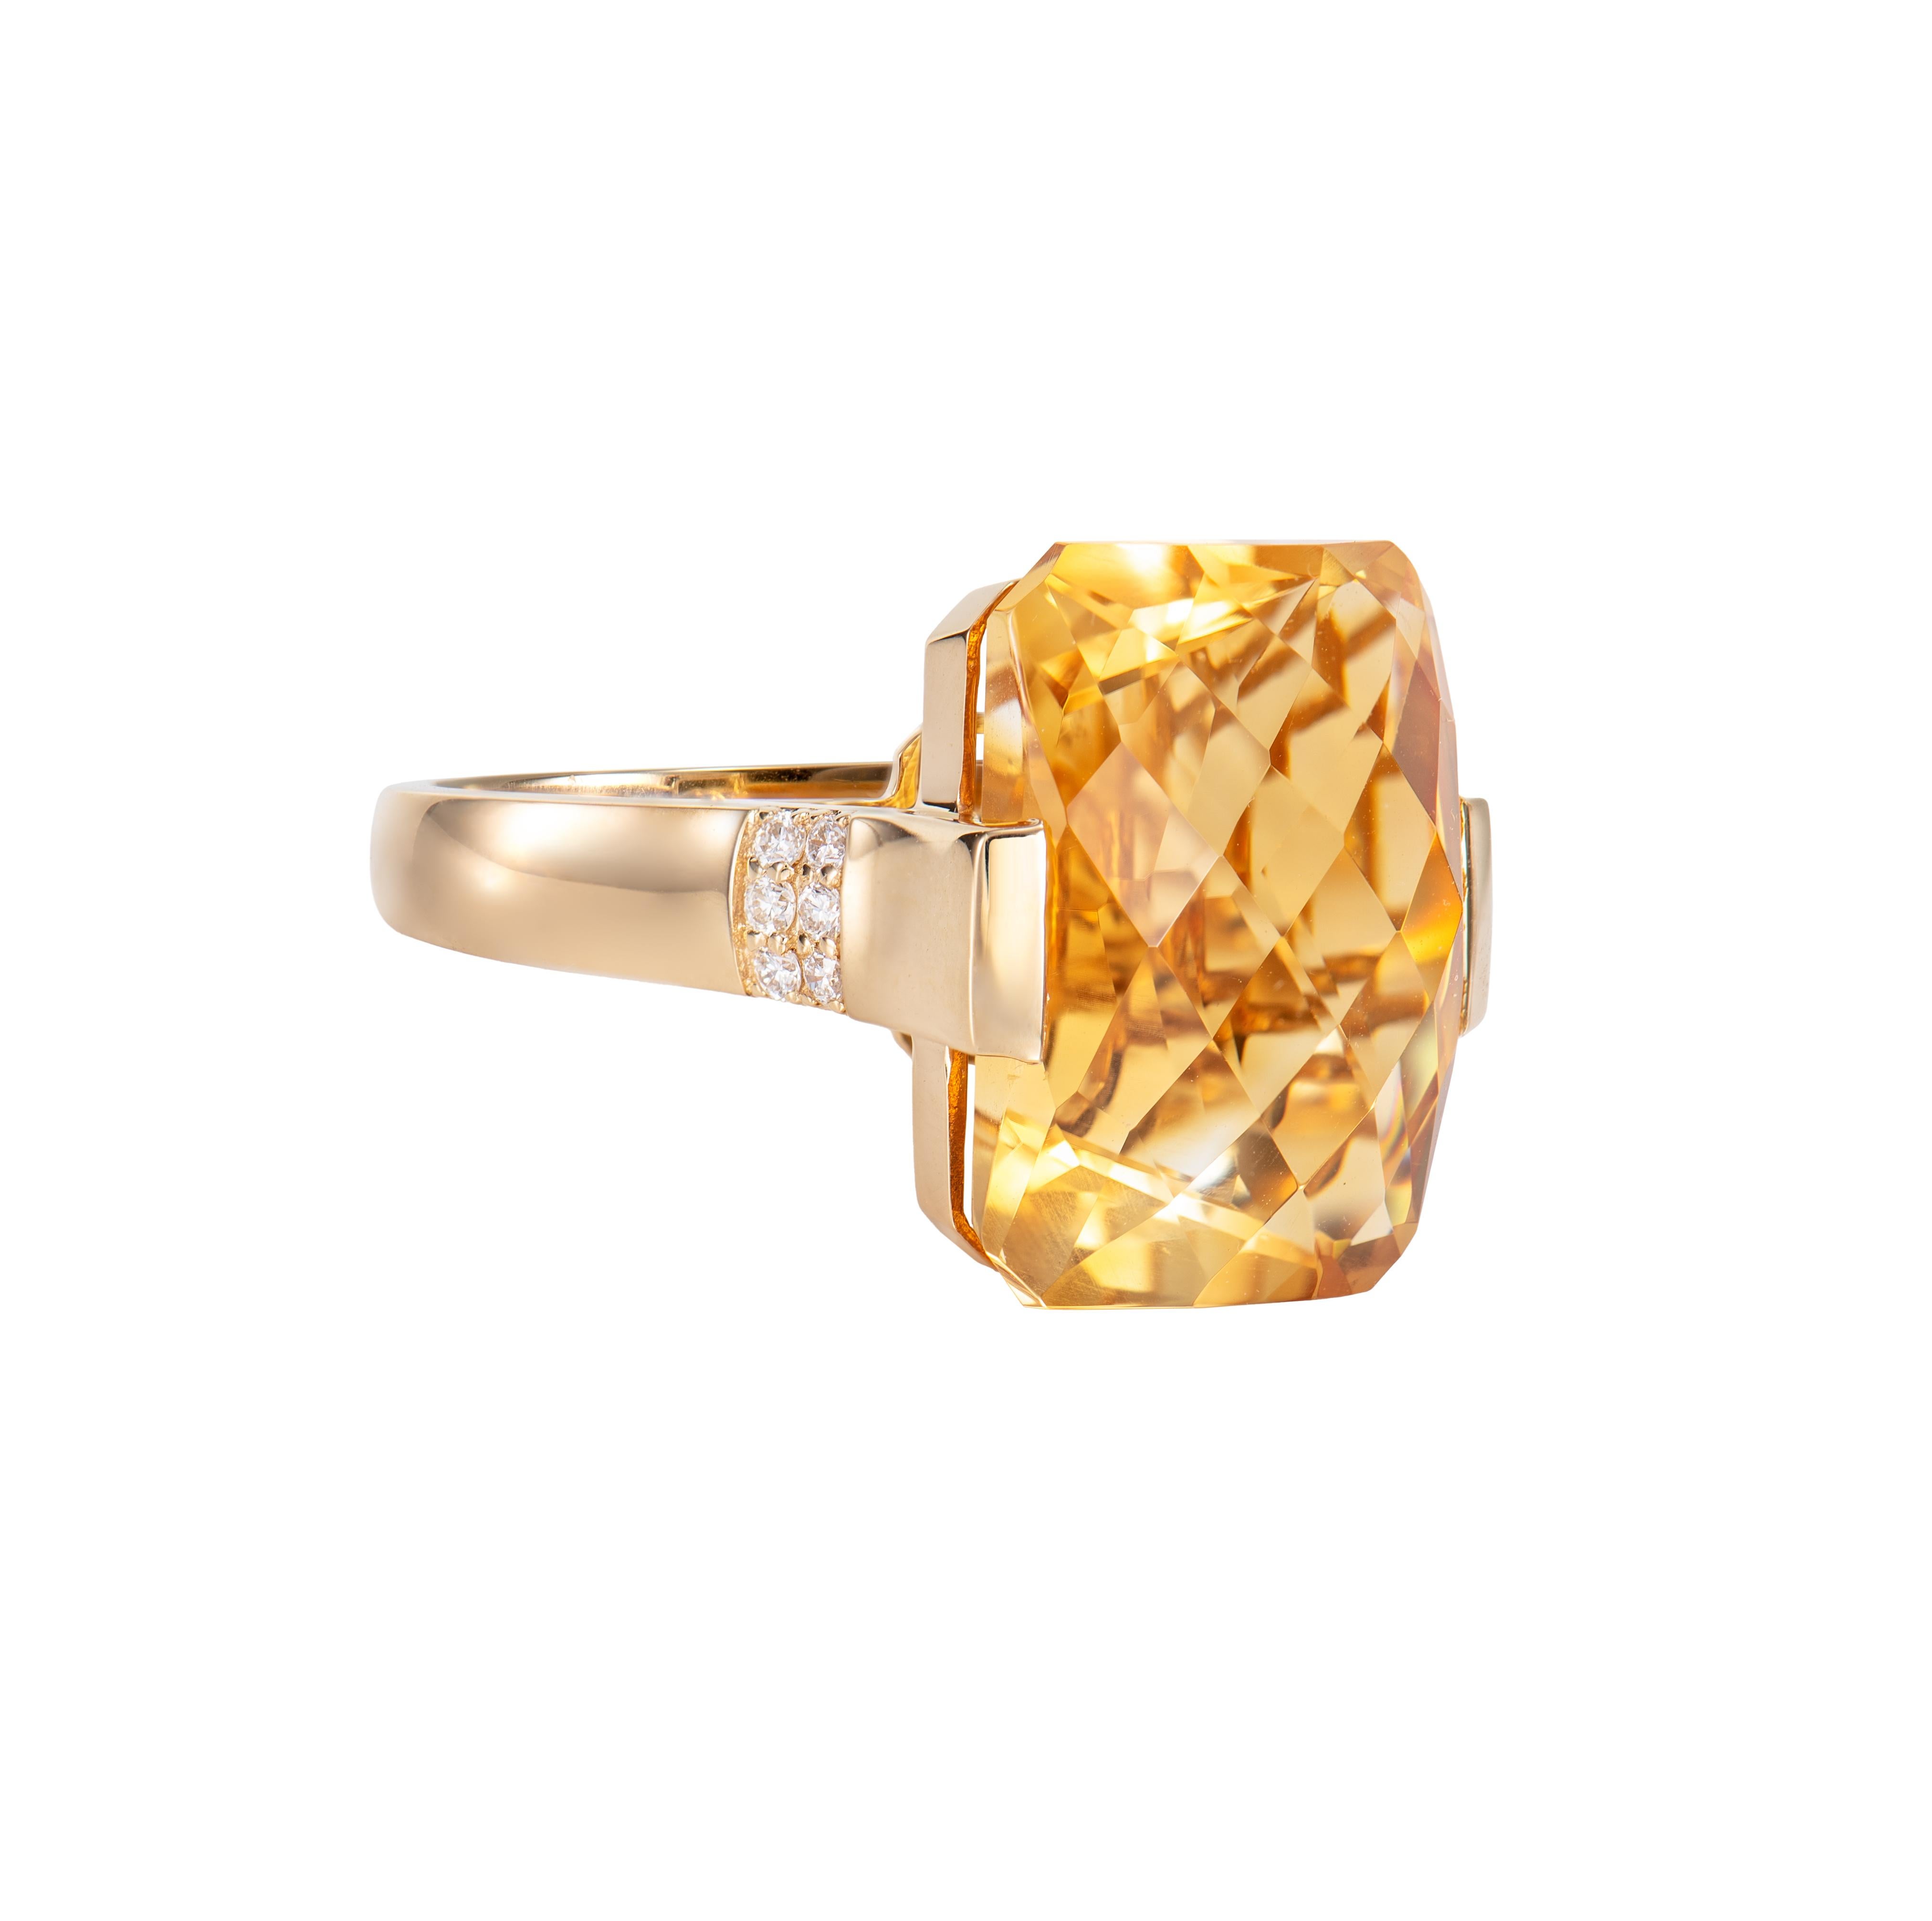 It is fancy Citrine Ring in an Octagon shape with yellow hue. The Ring is elegant and can be worn for many occasions. 

Citrine Fancy Ring in 18Karat Yellow Gold with White Diamond.

Citrine: 18.03 carat, 18X13mm size, Octagon shape.
White Diamond: